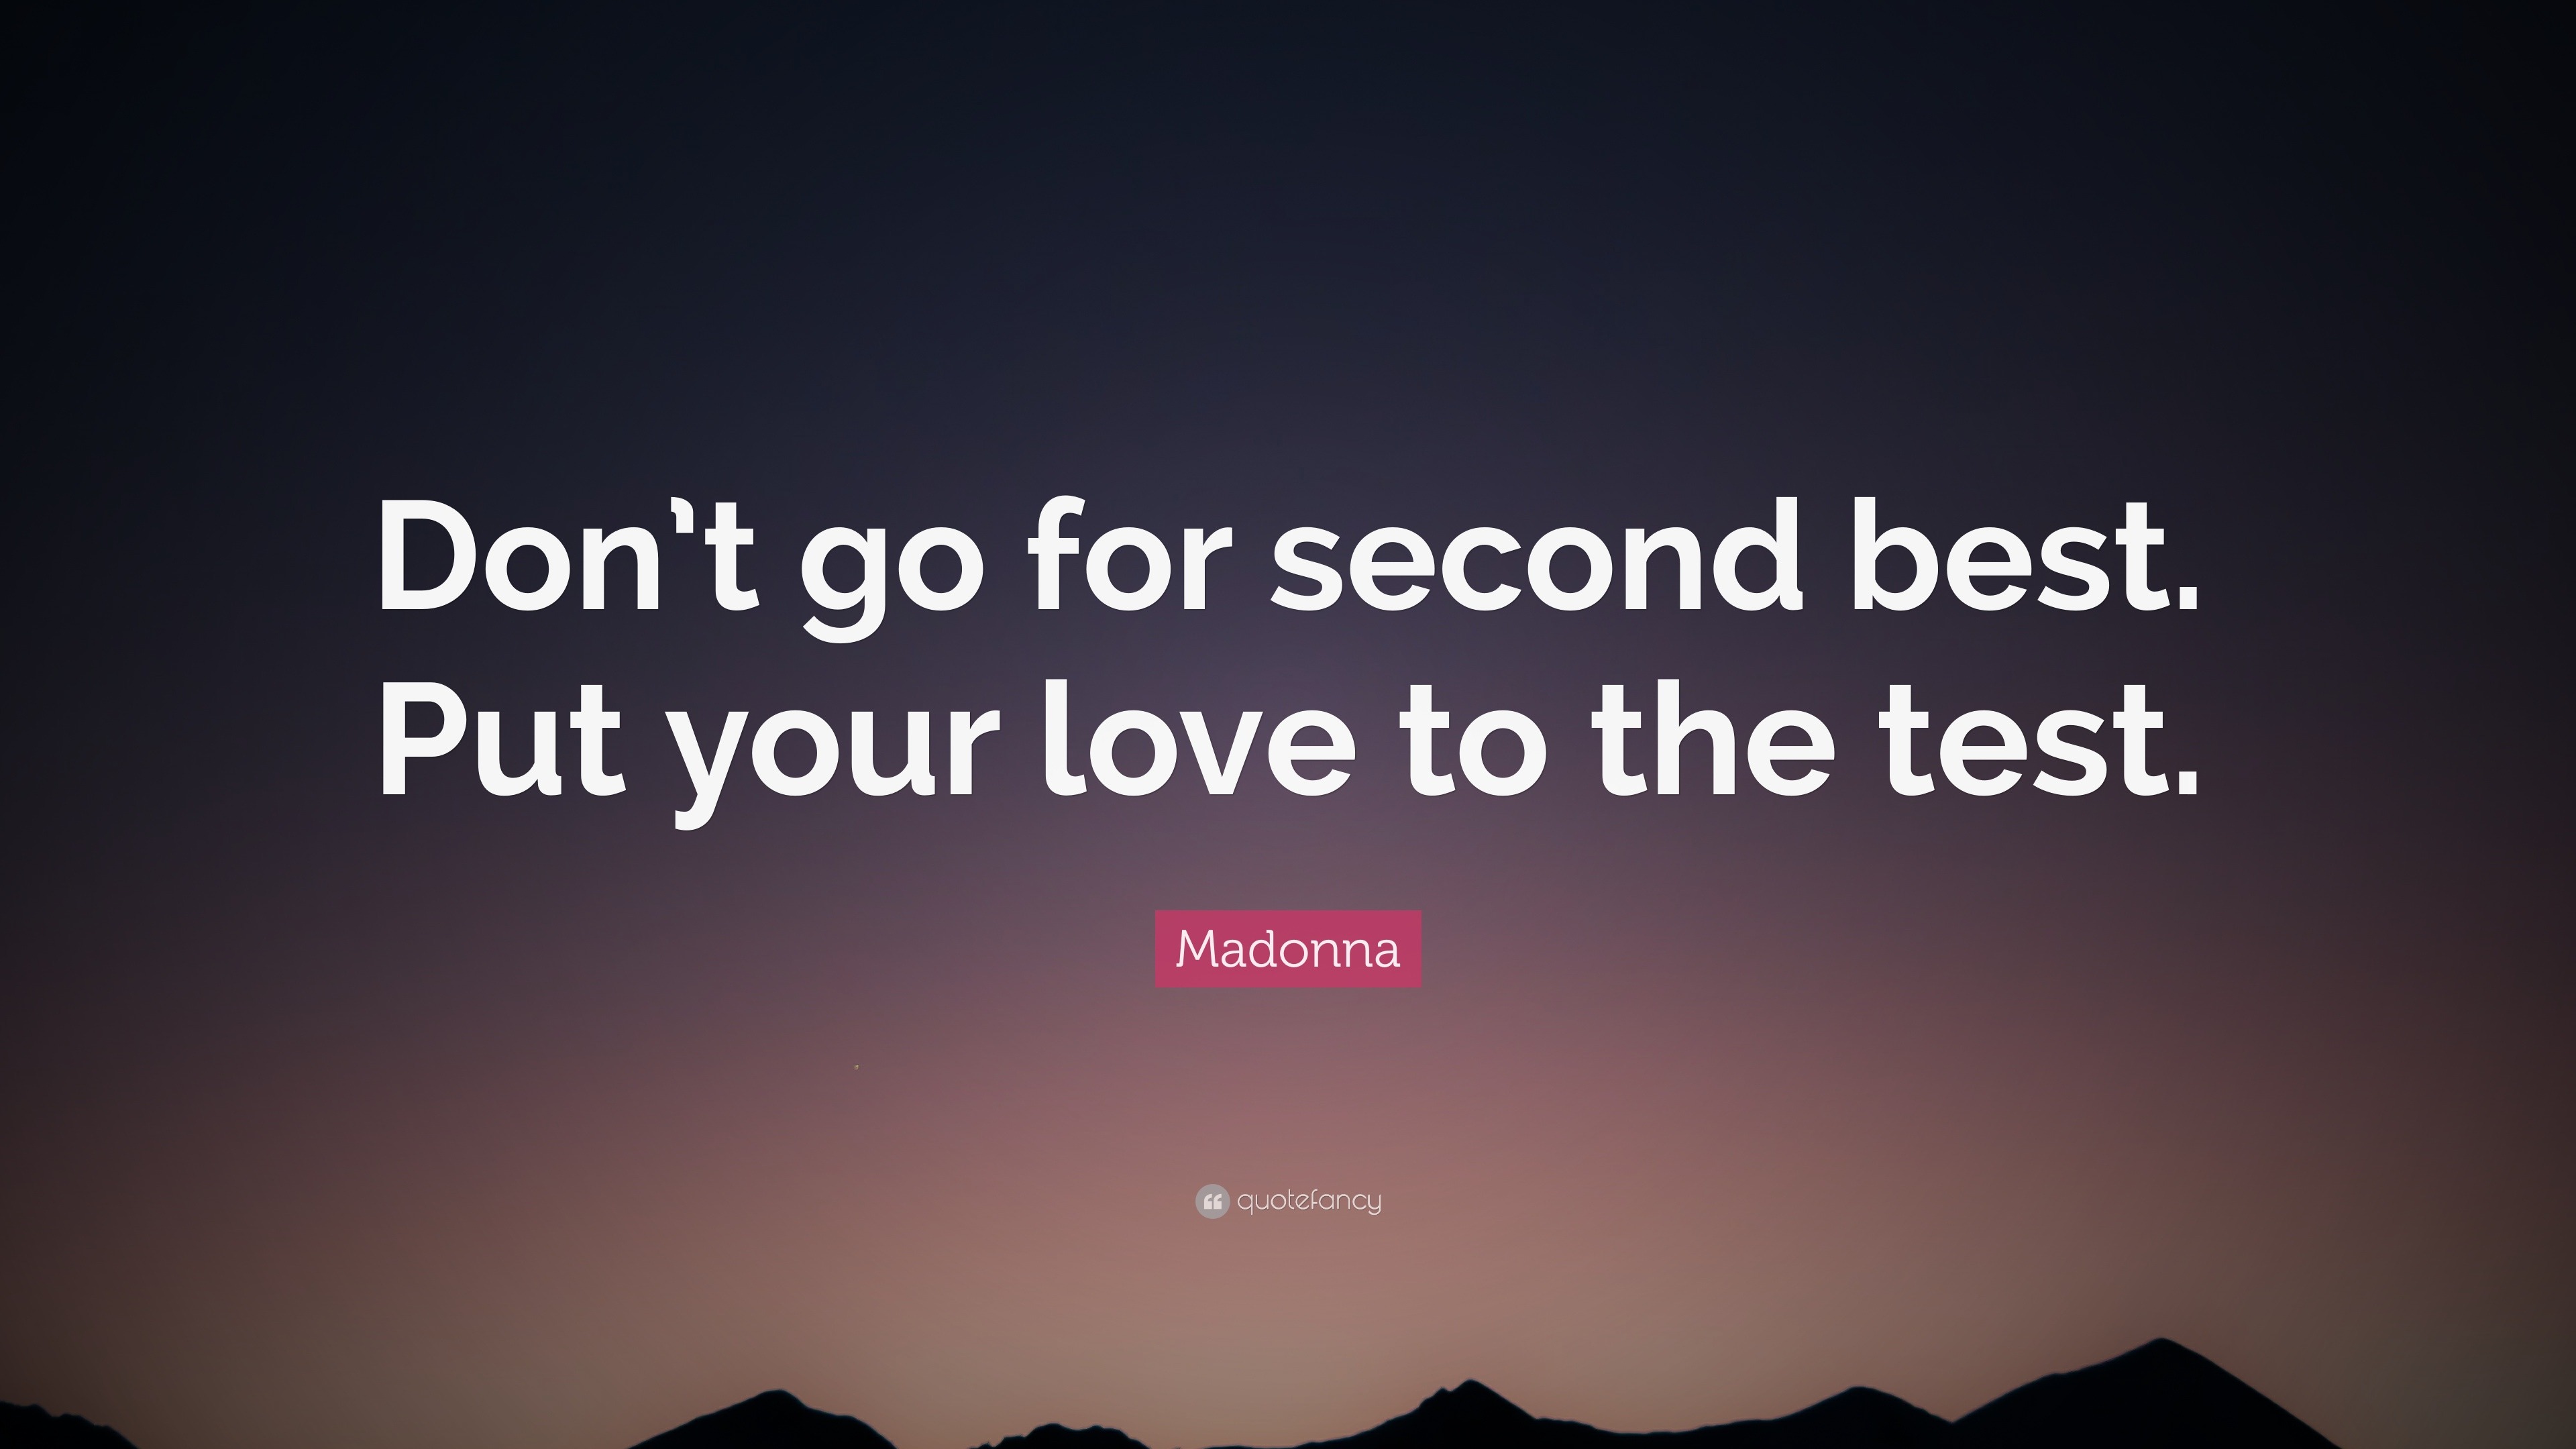 Madonna Quote “Don t go for second best Put your love to